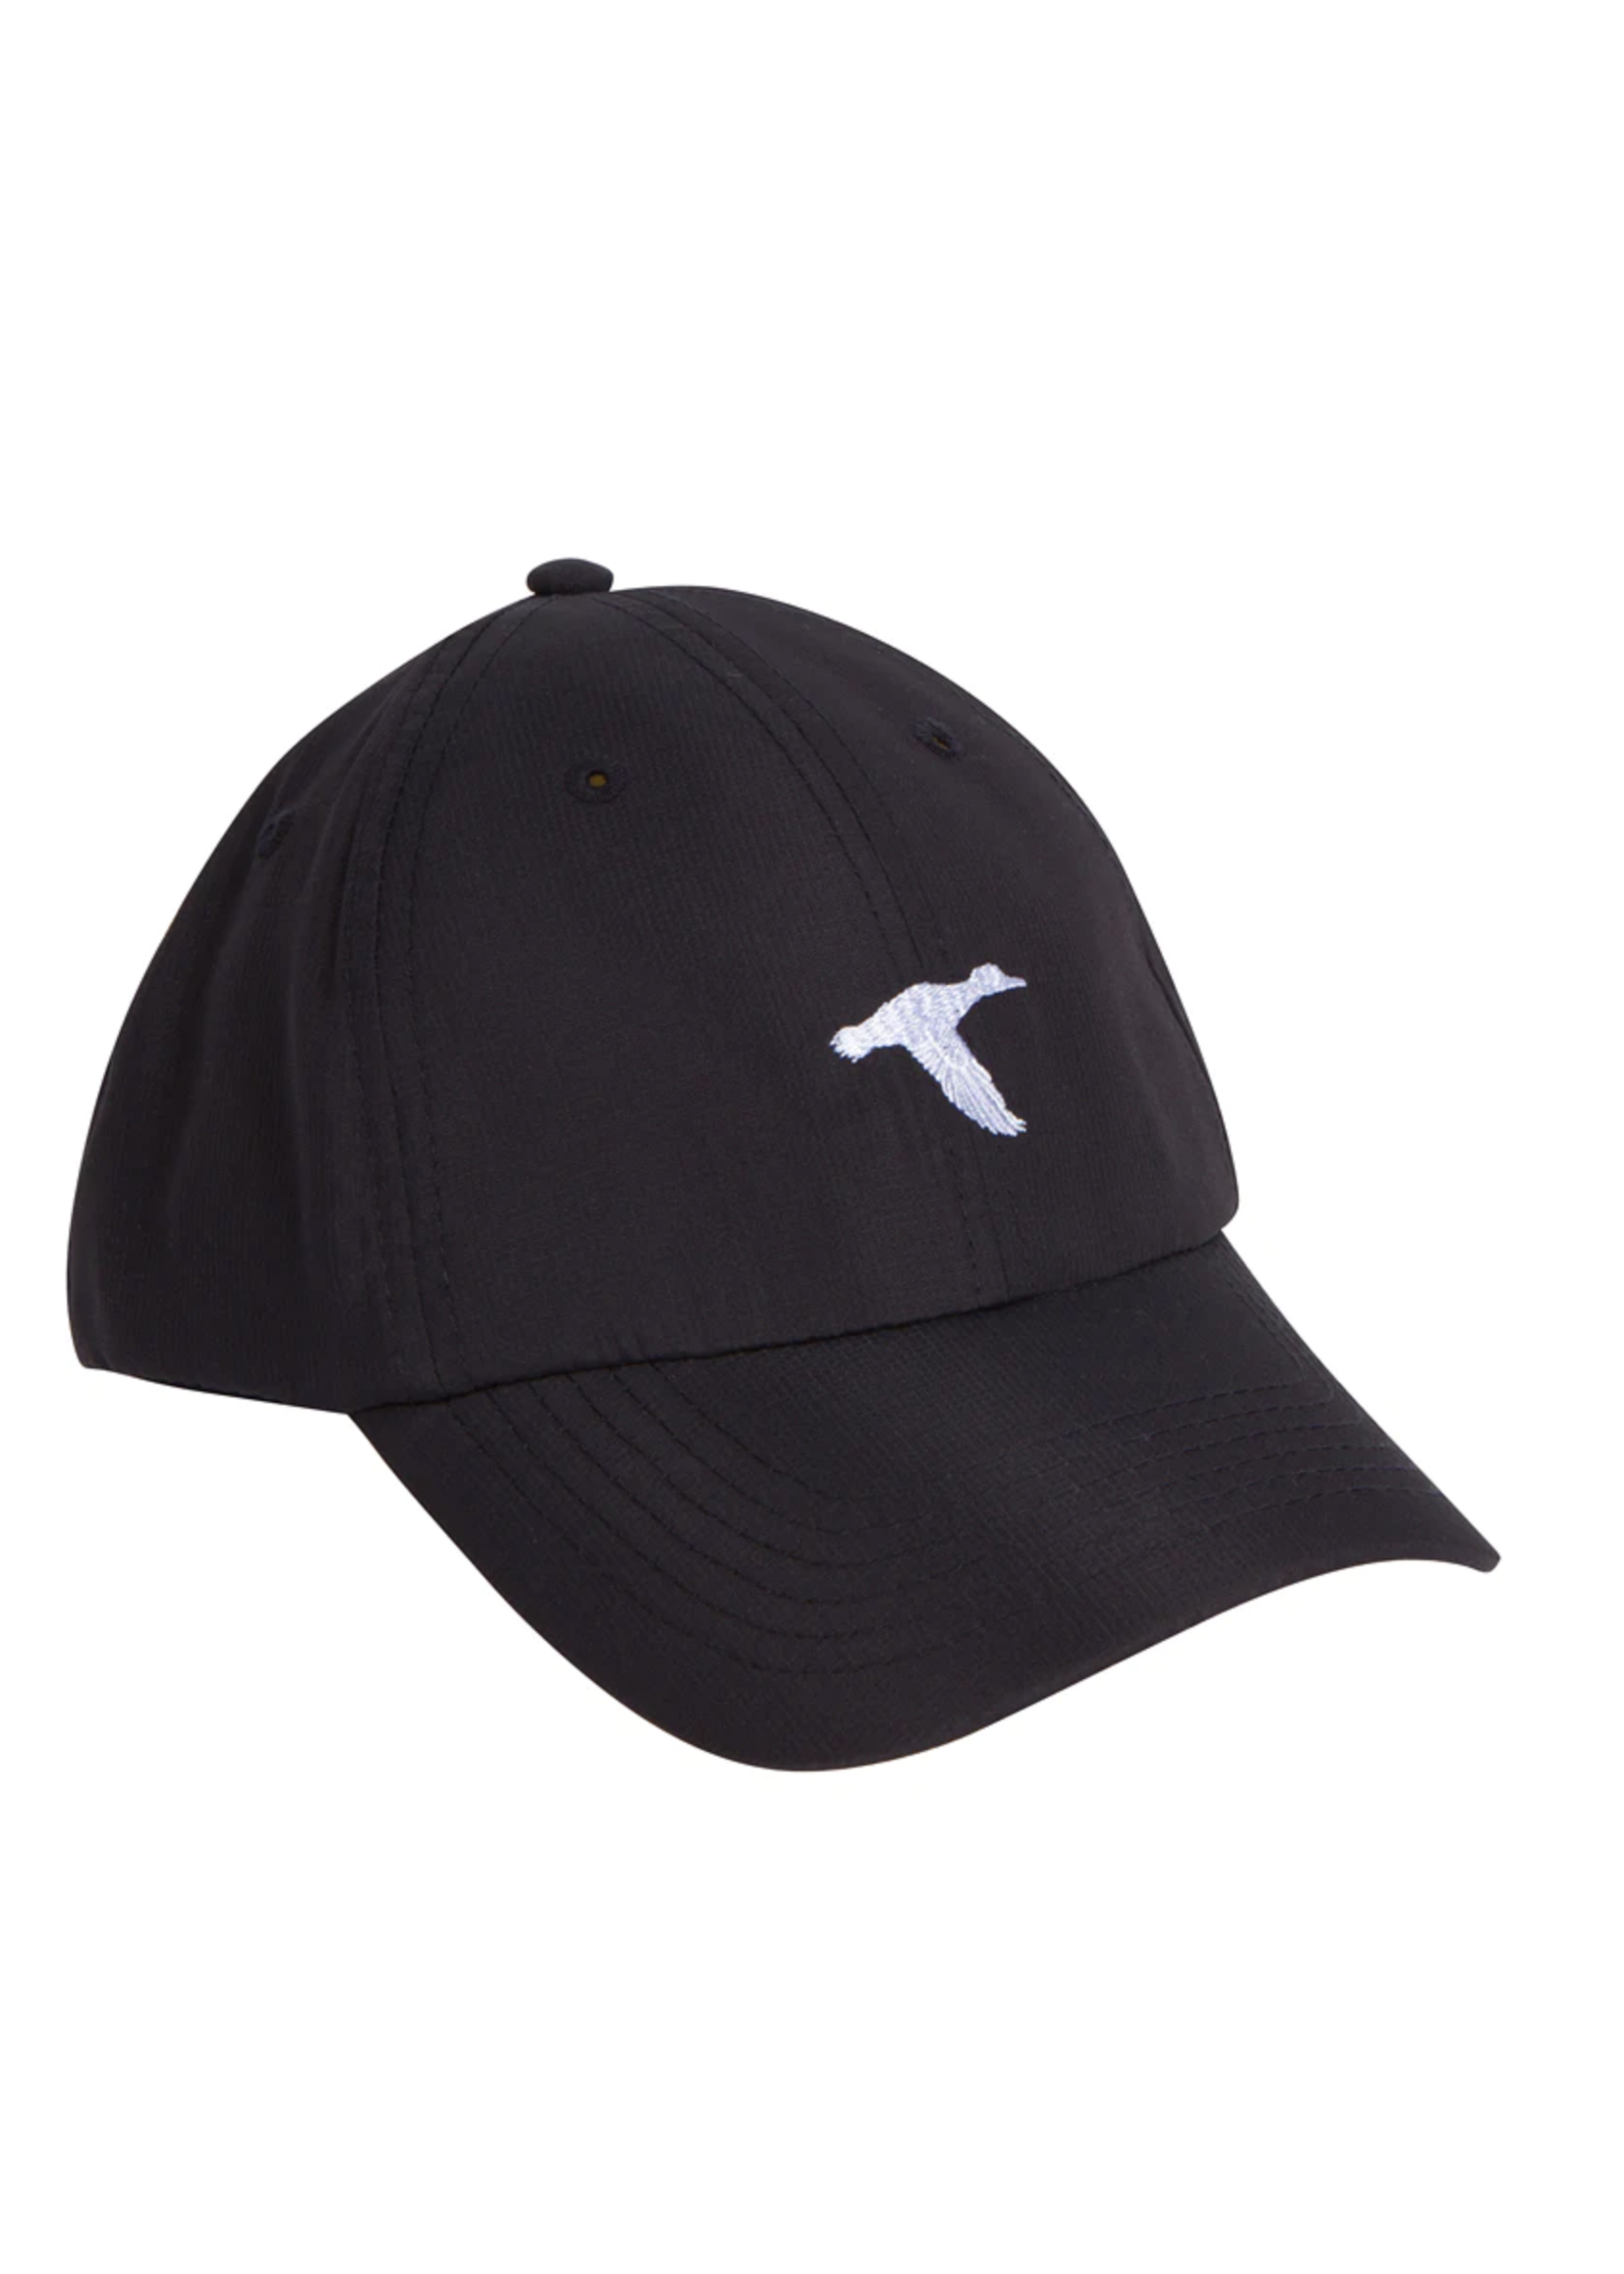 GenTeal Apparel Embroidered Performance Hat